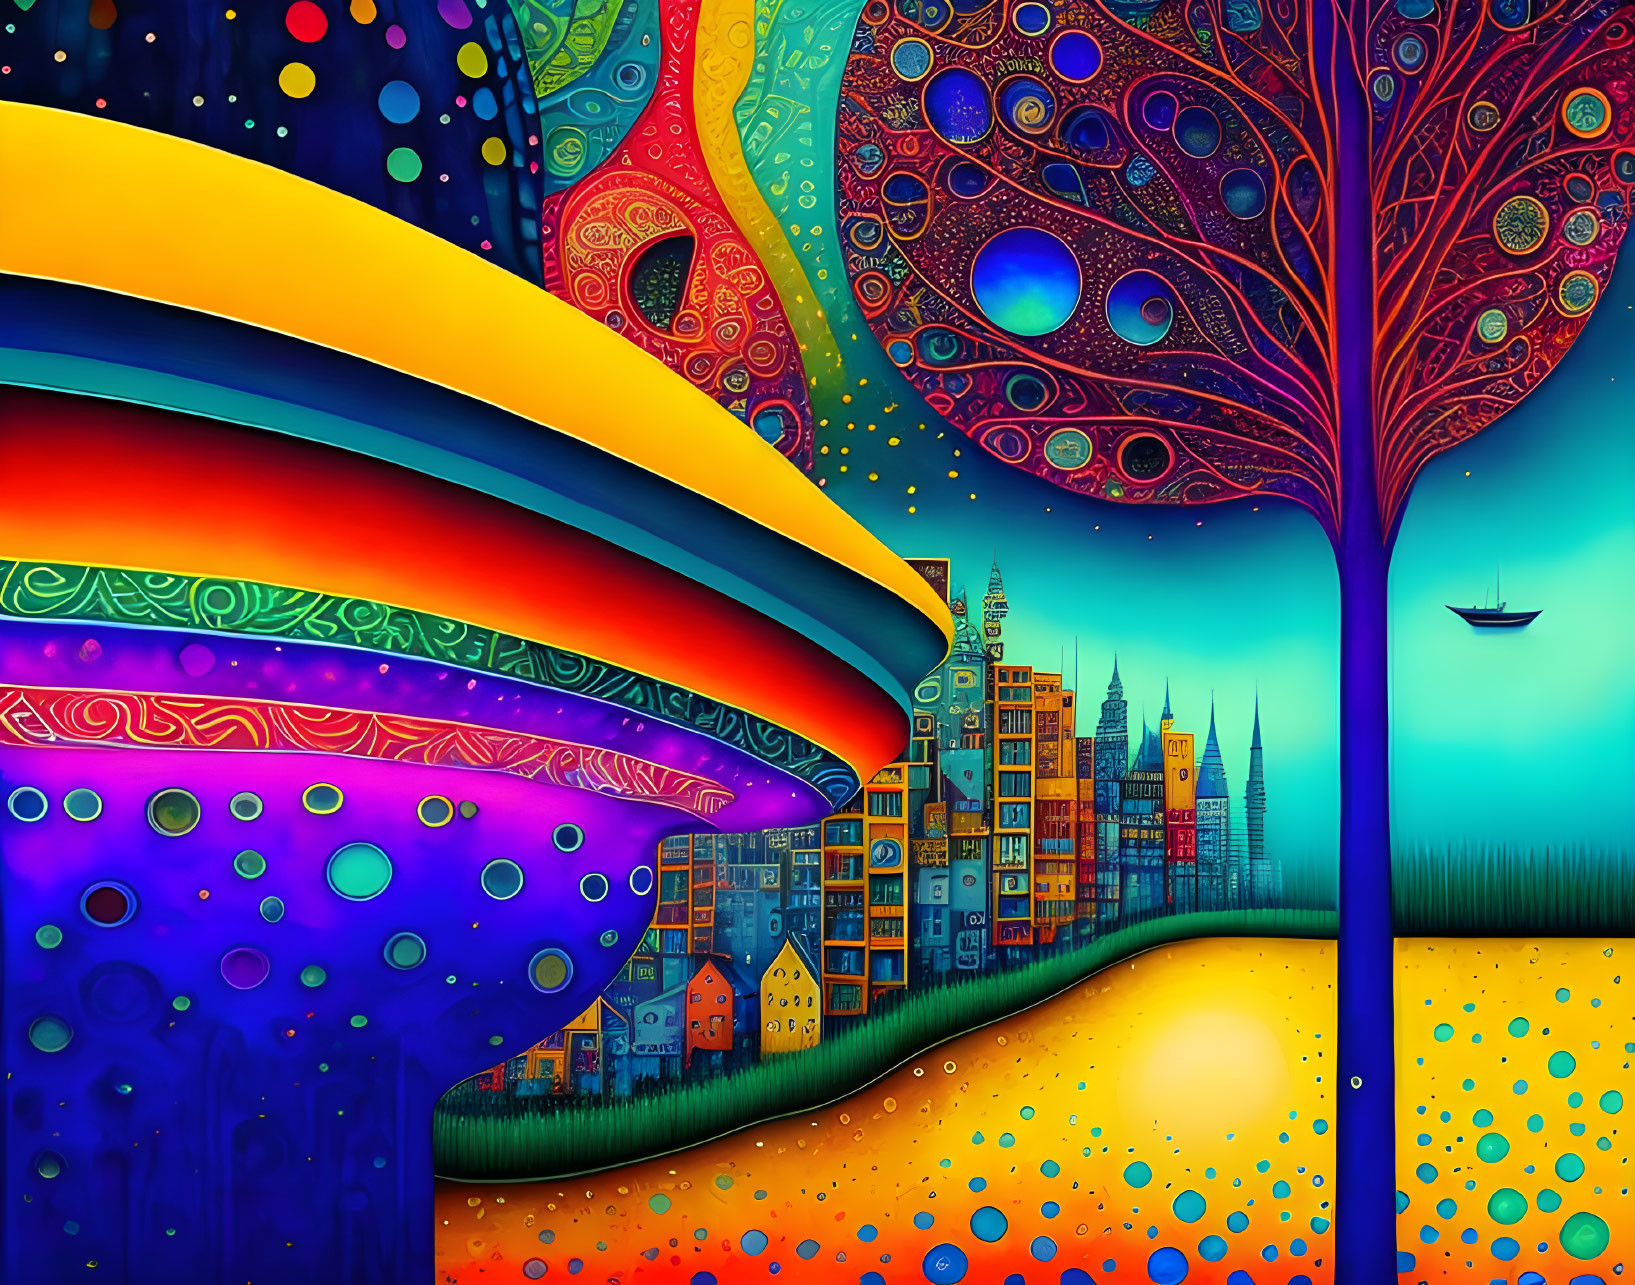 Colorful Landscape Artwork with Rainbow, Whimsical Buildings, and Patterned Tree